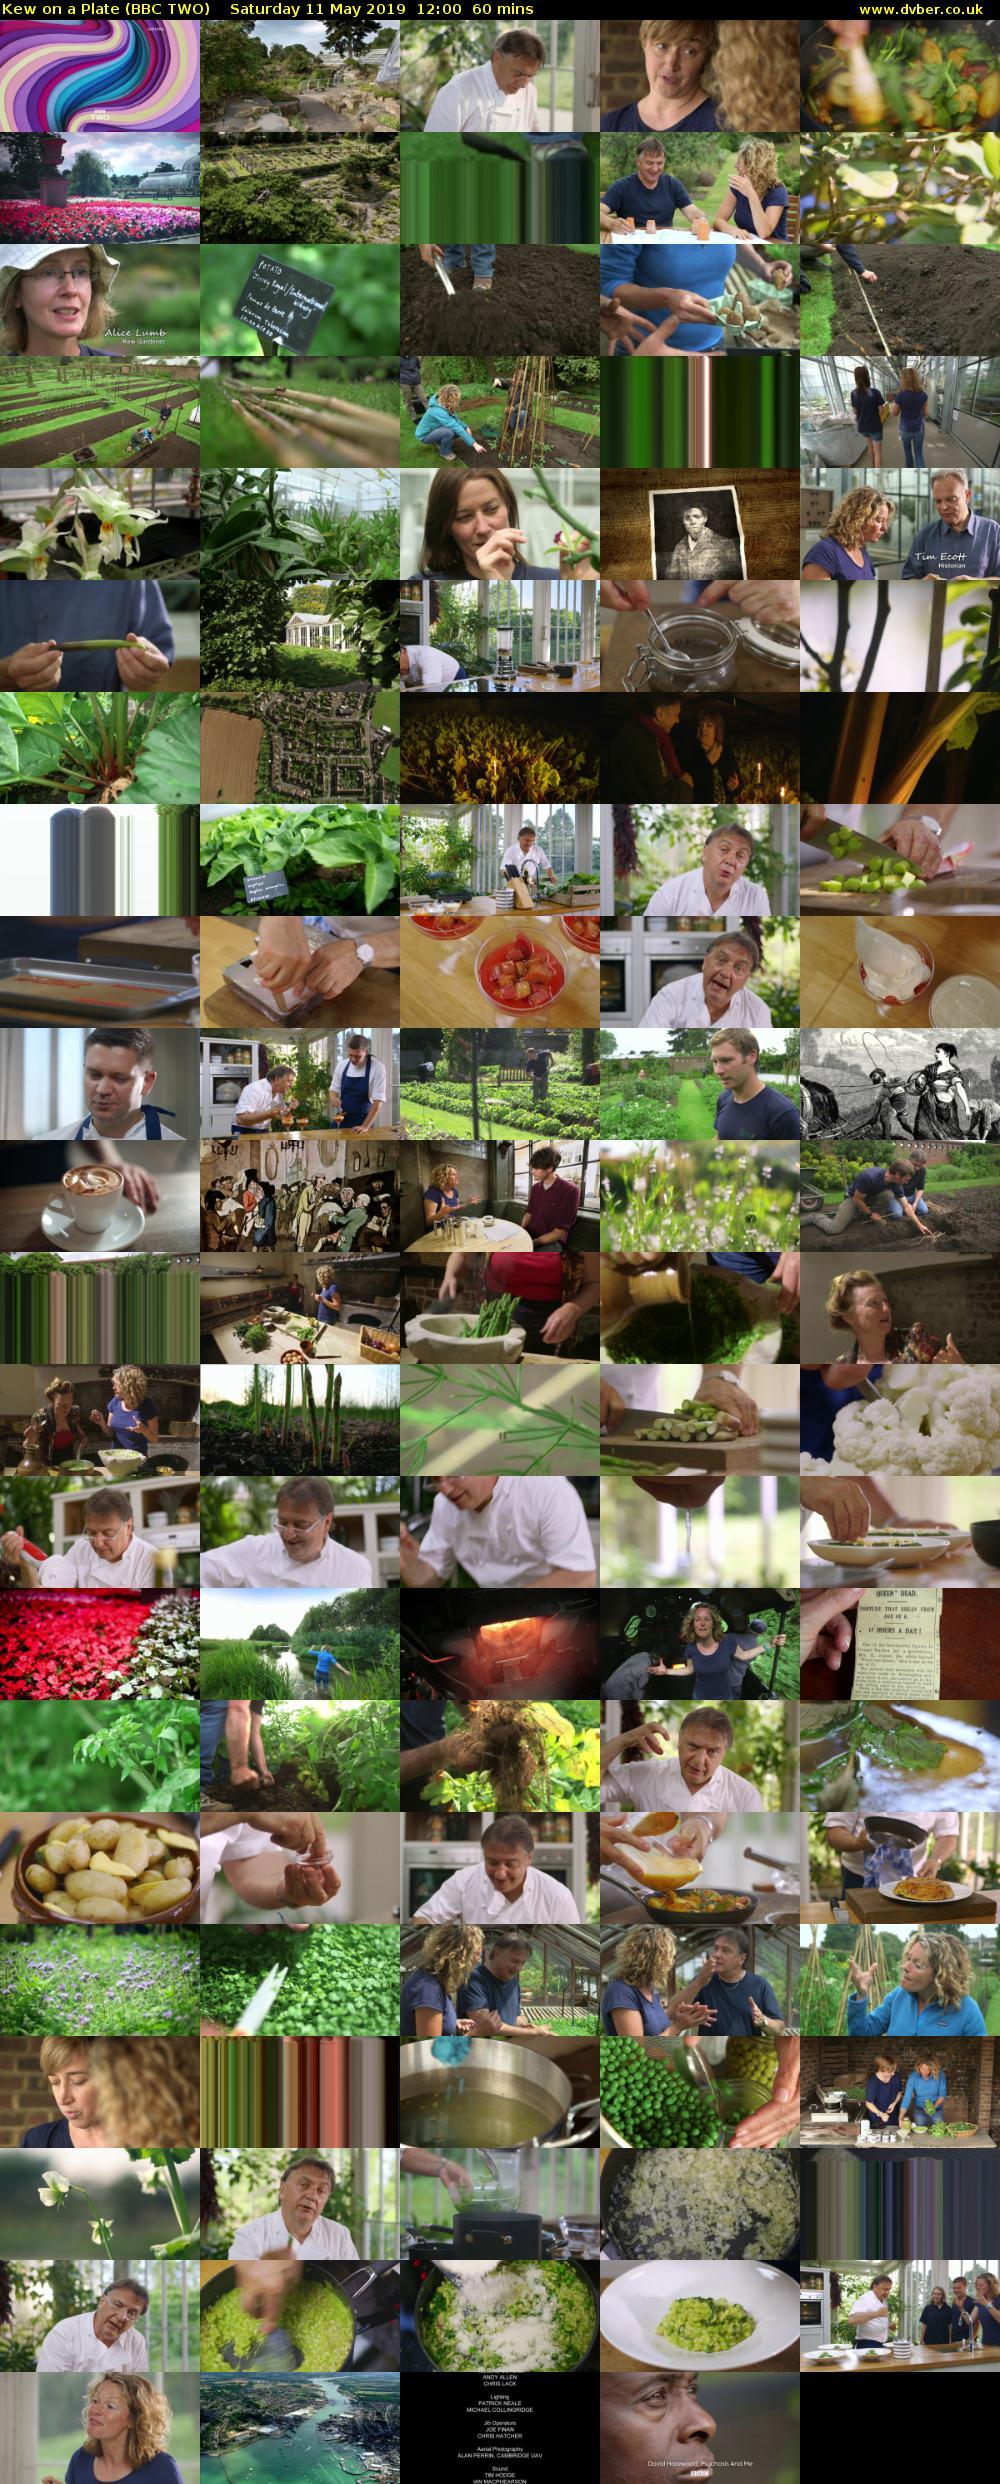 Kew on a Plate (BBC TWO) Saturday 11 May 2019 12:00 - 13:00